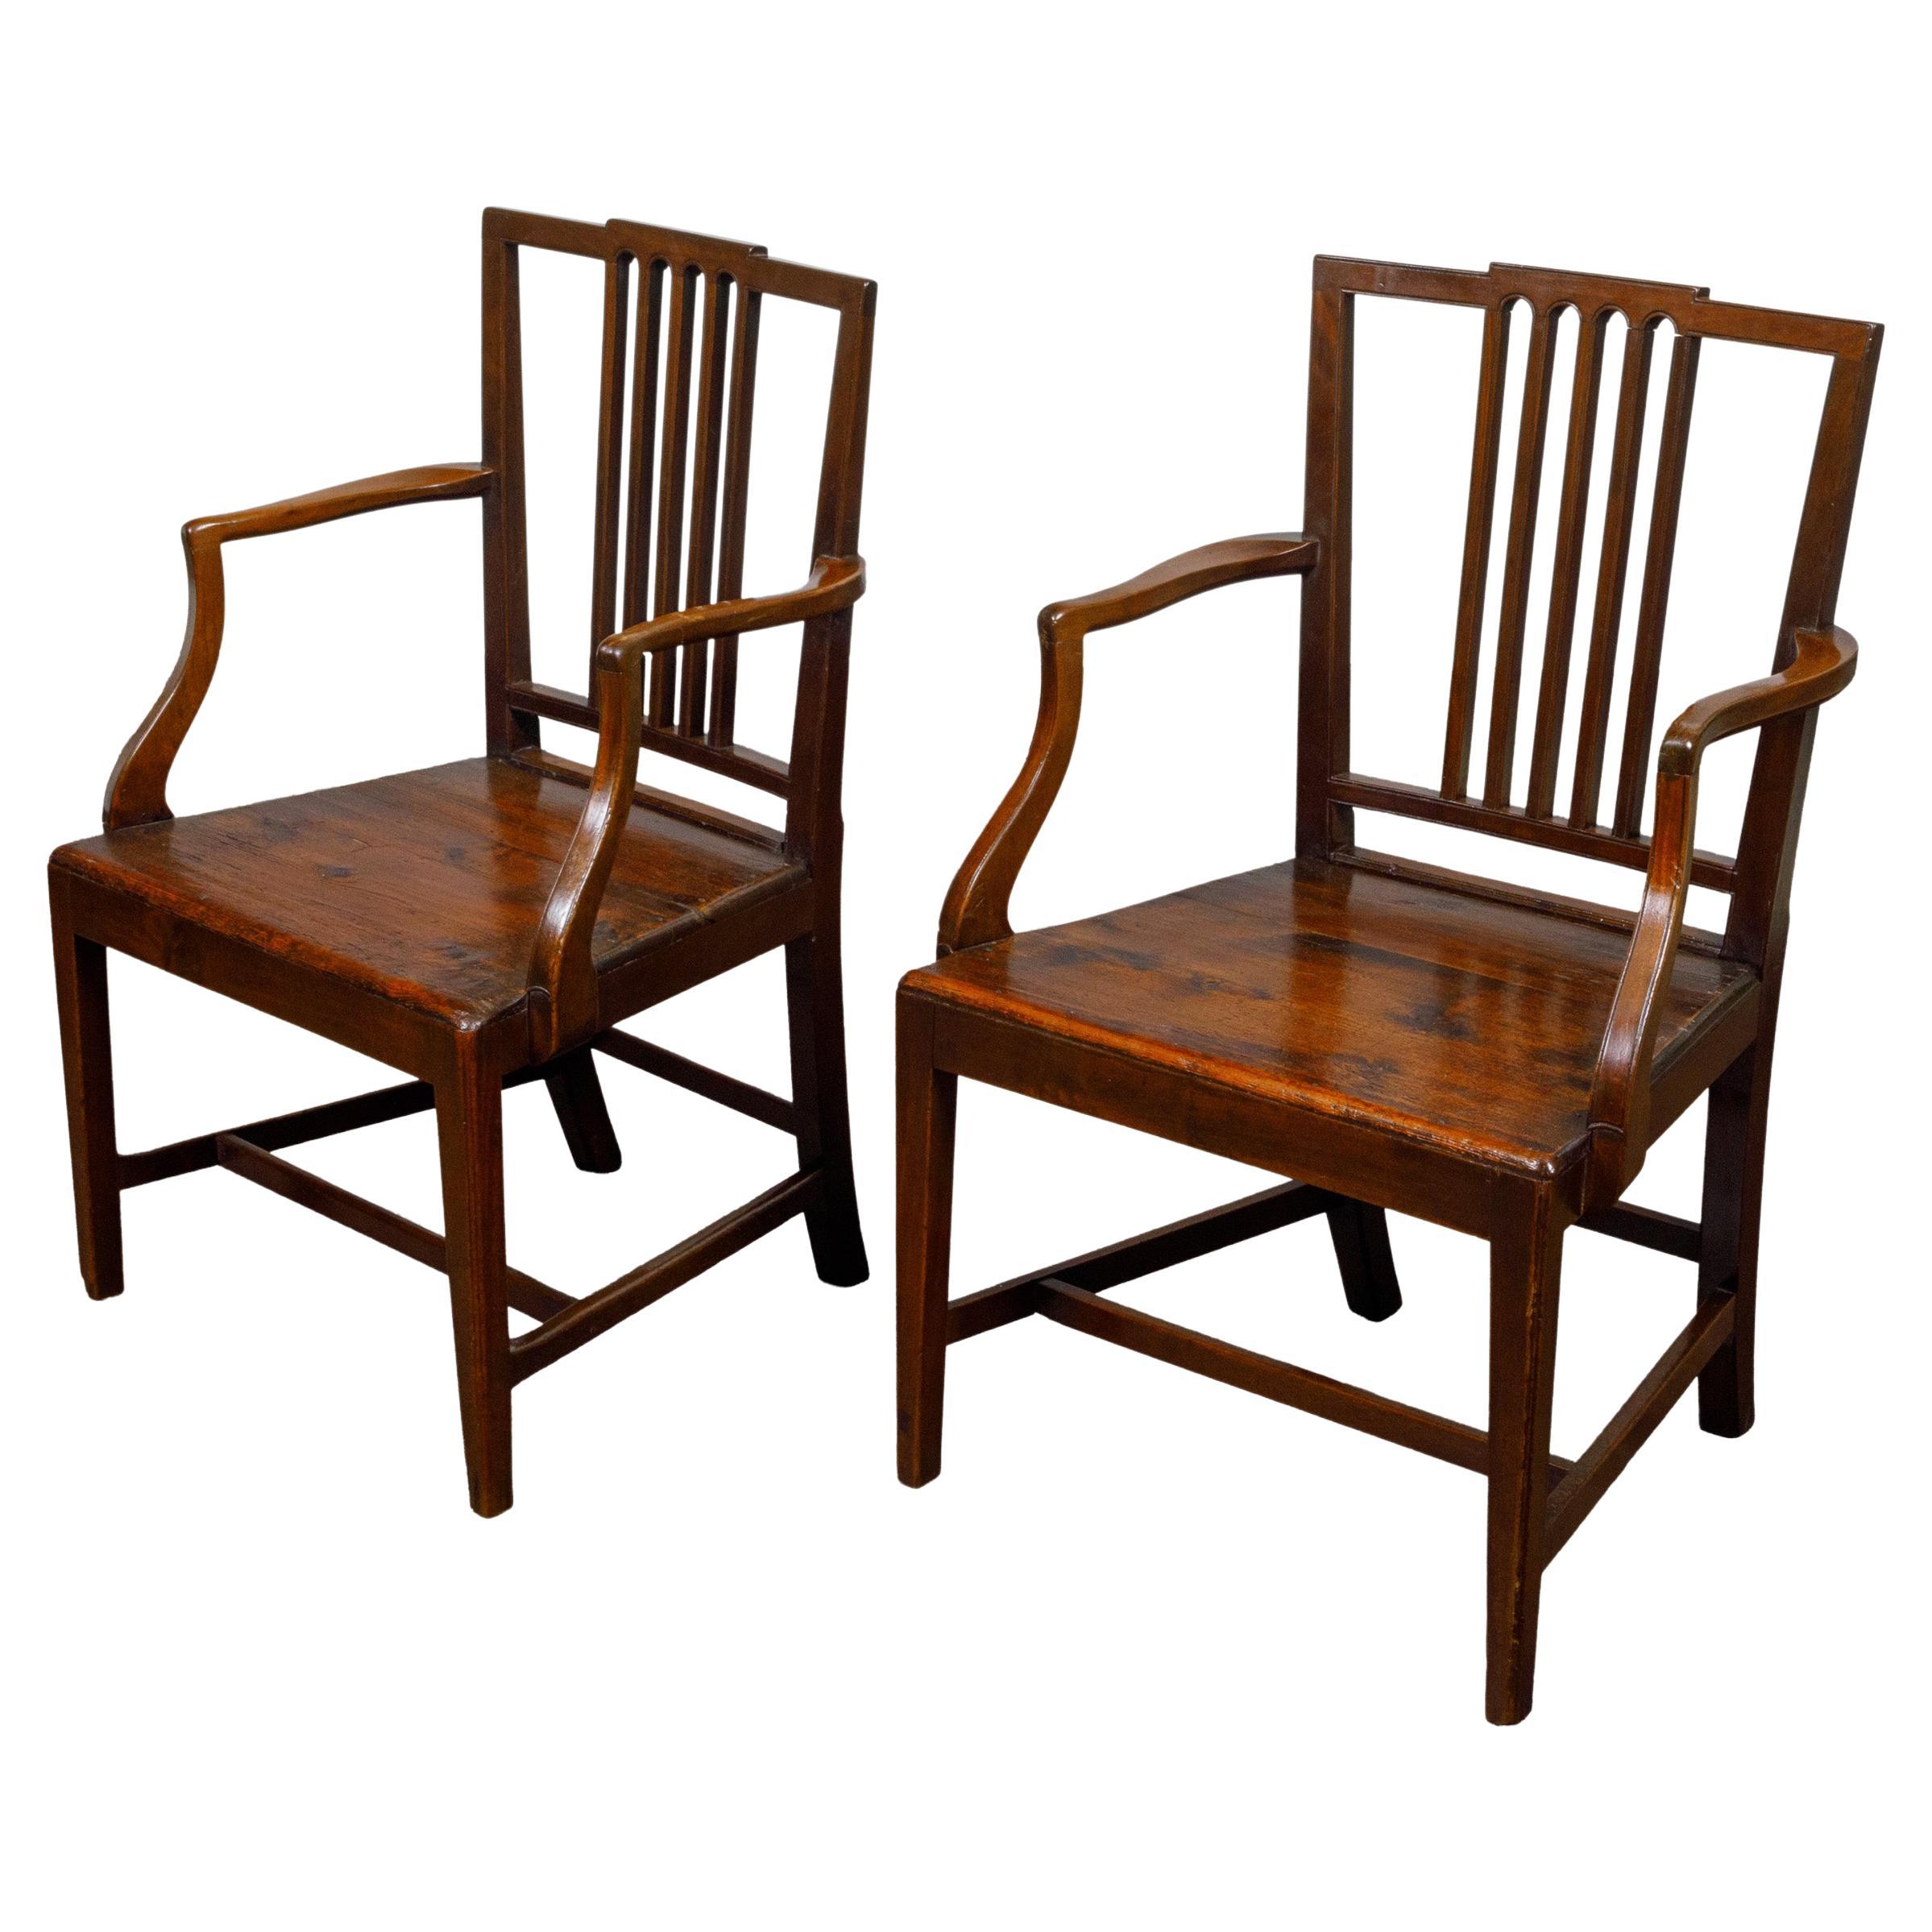 Pair of English Early 19th Century Plank Seat Chairs with Scrolling Arms For Sale